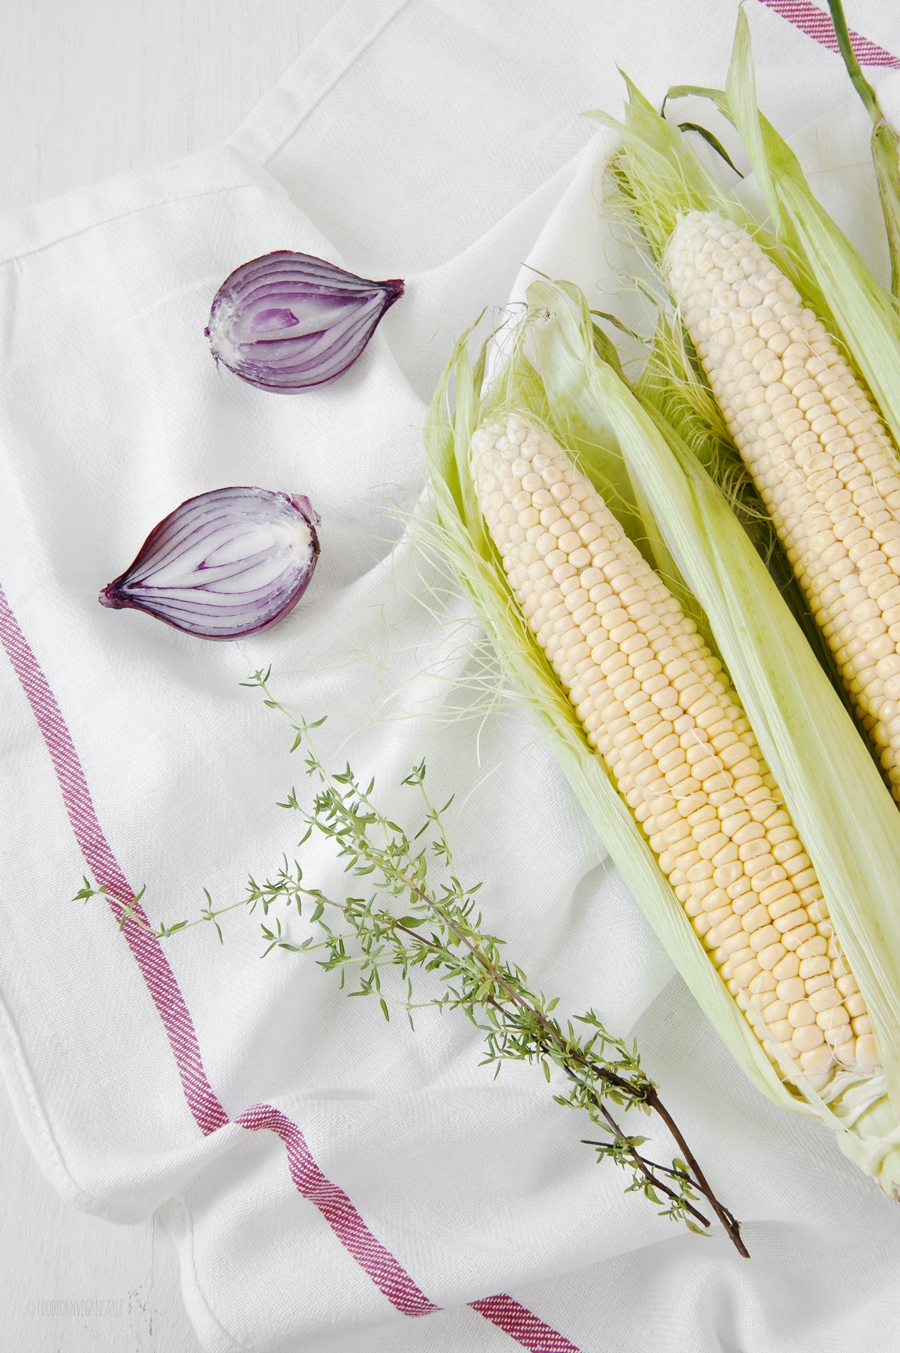 Sweetcorn salad with coconut & thyme